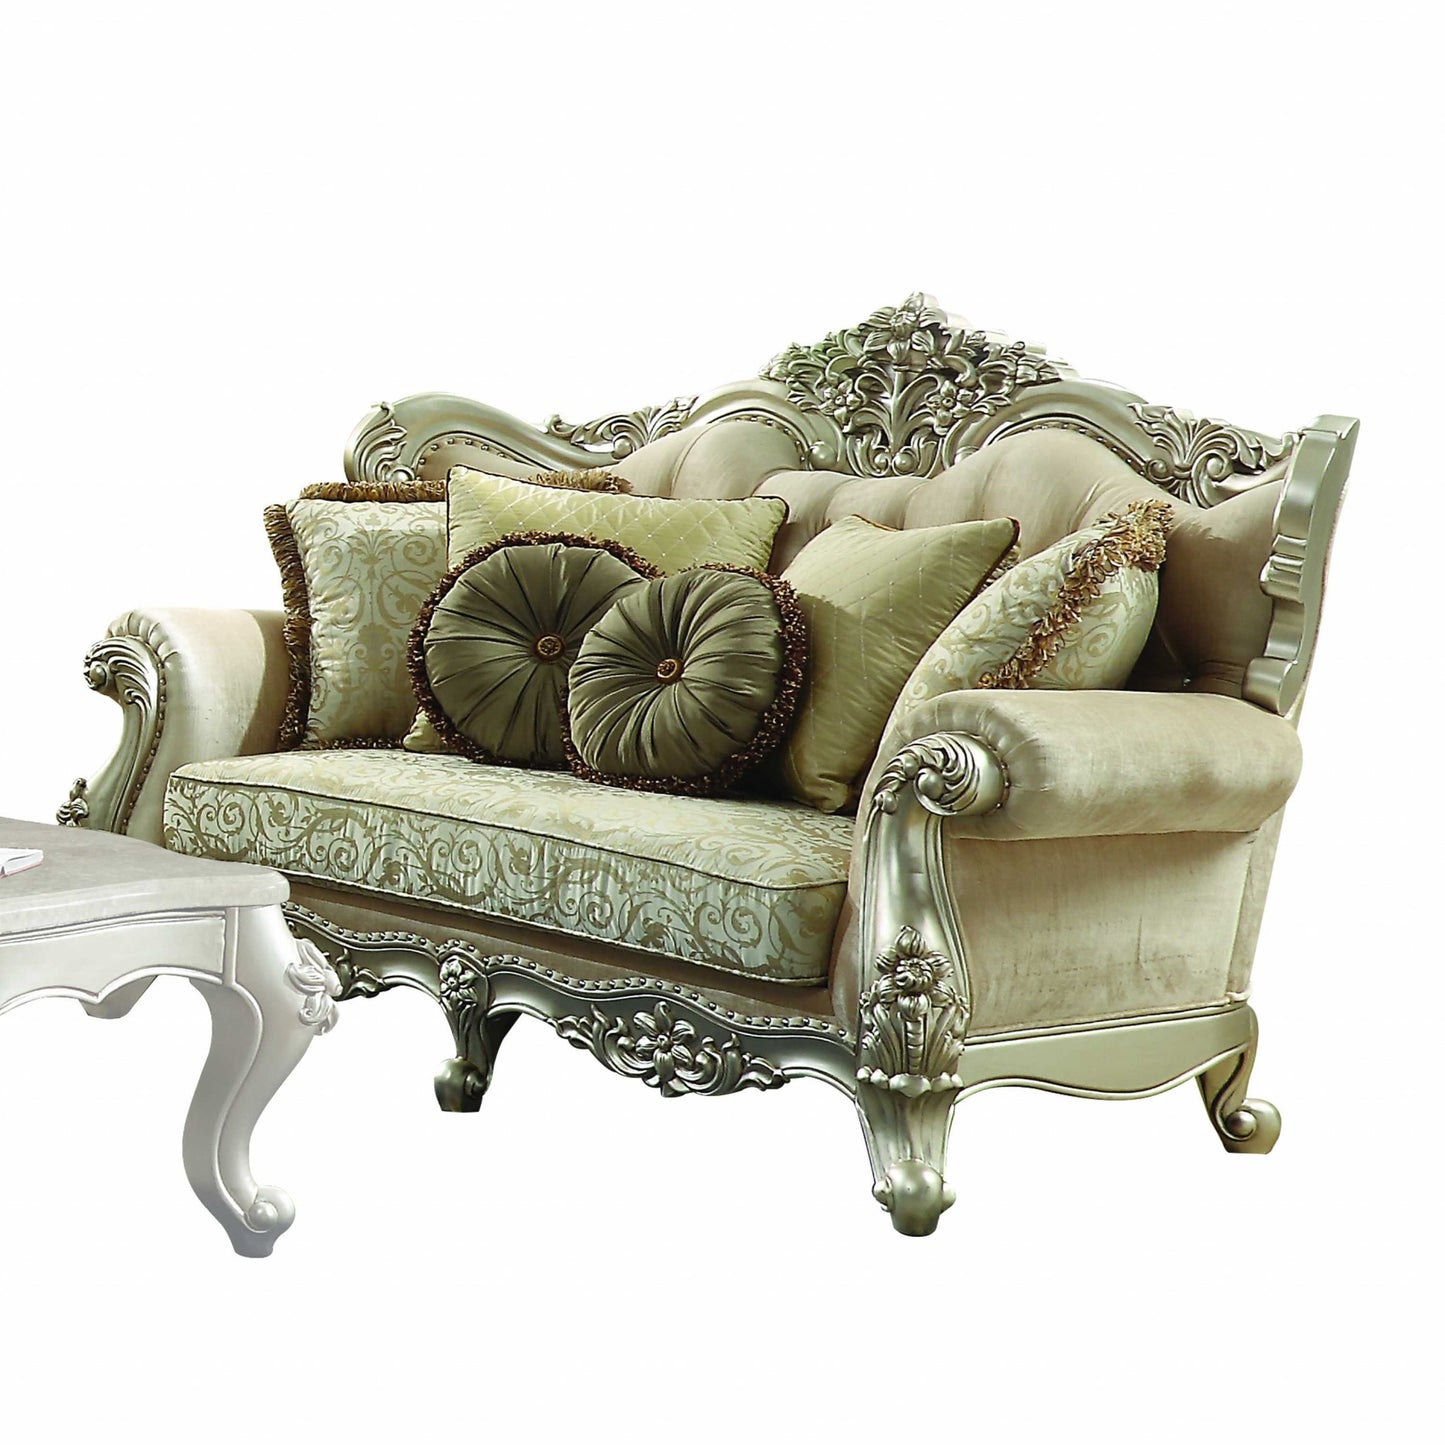 72" Green And Light Green Polyester Blend Damask Chesterfield Loveseat and Toss Pillows